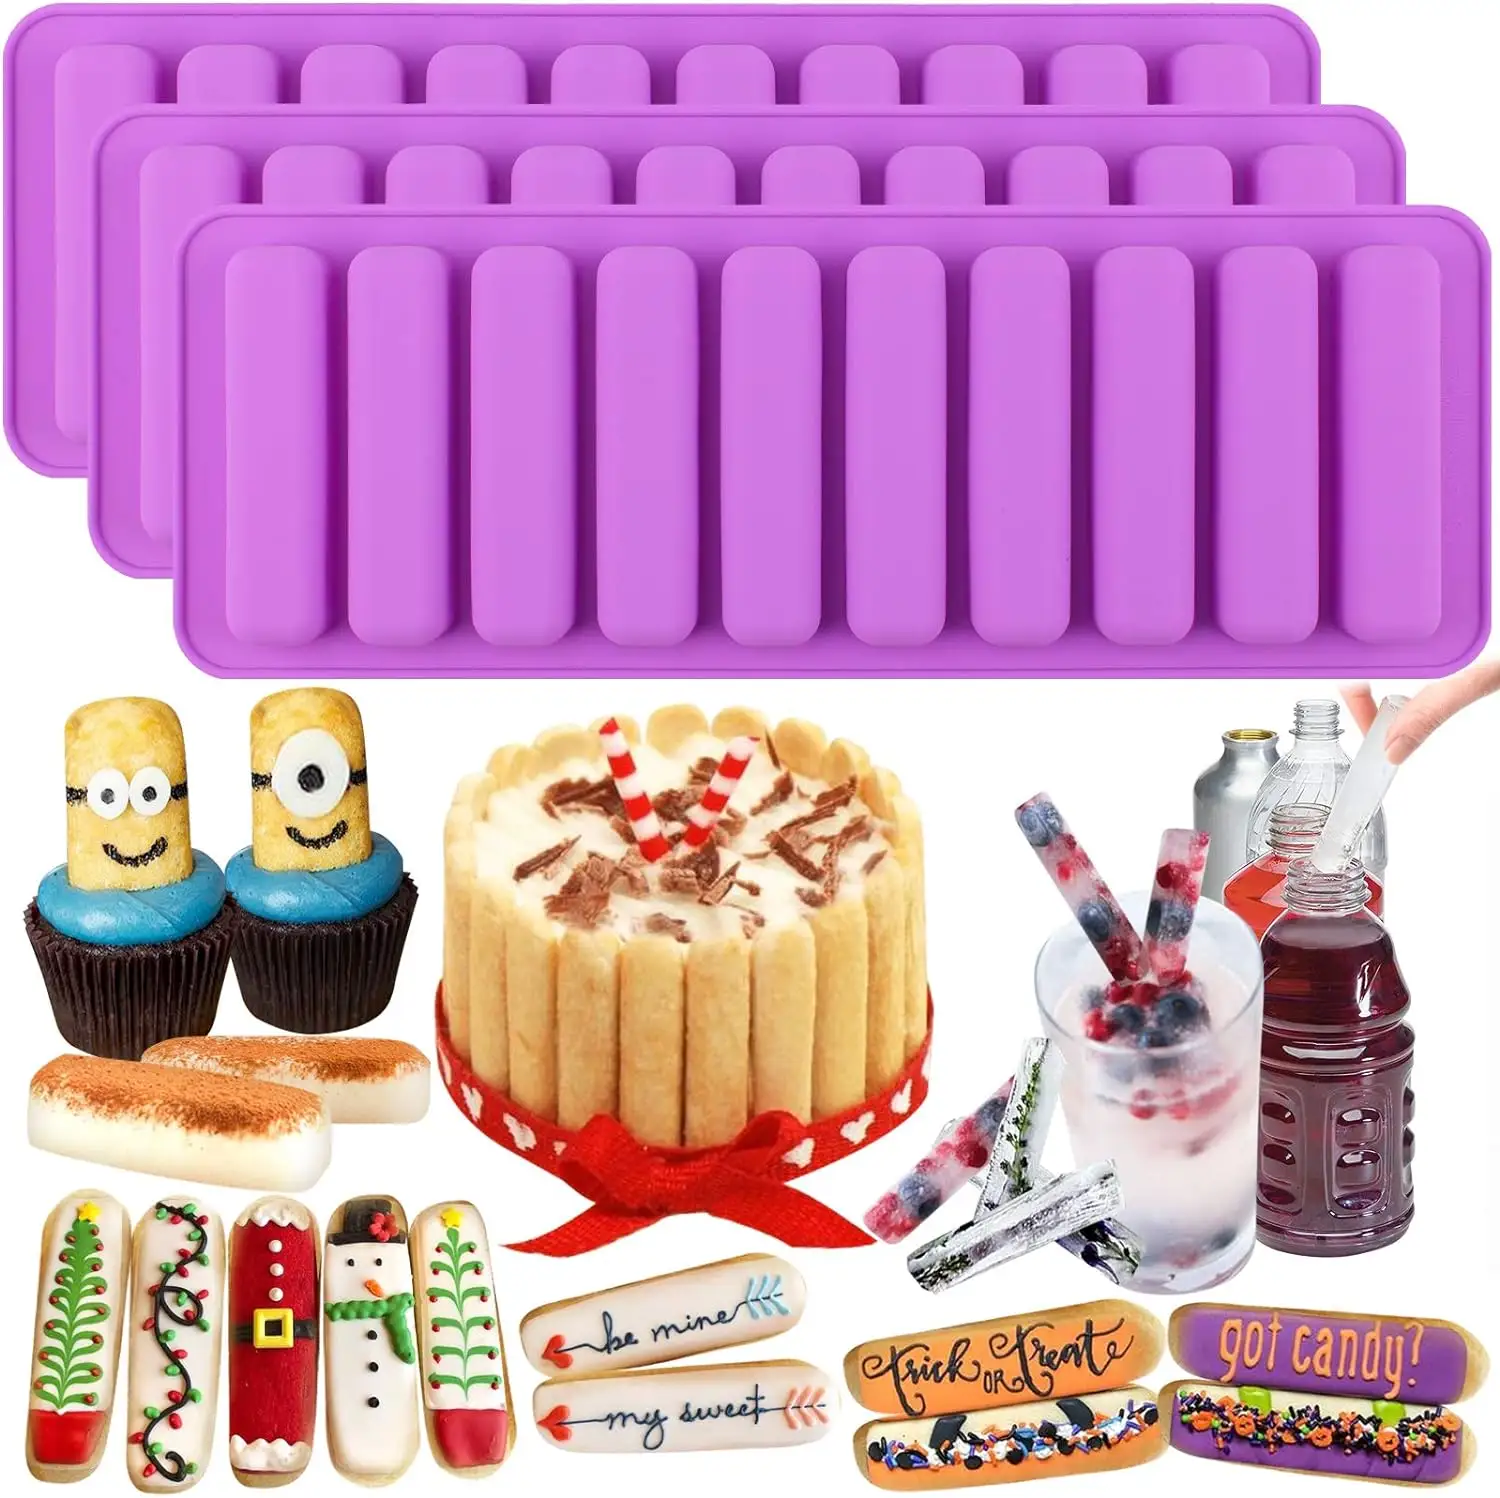 Finger shaped silicone mold rectangular chocolate bar mold suitable for cheese dog snacks crayons ice cubes